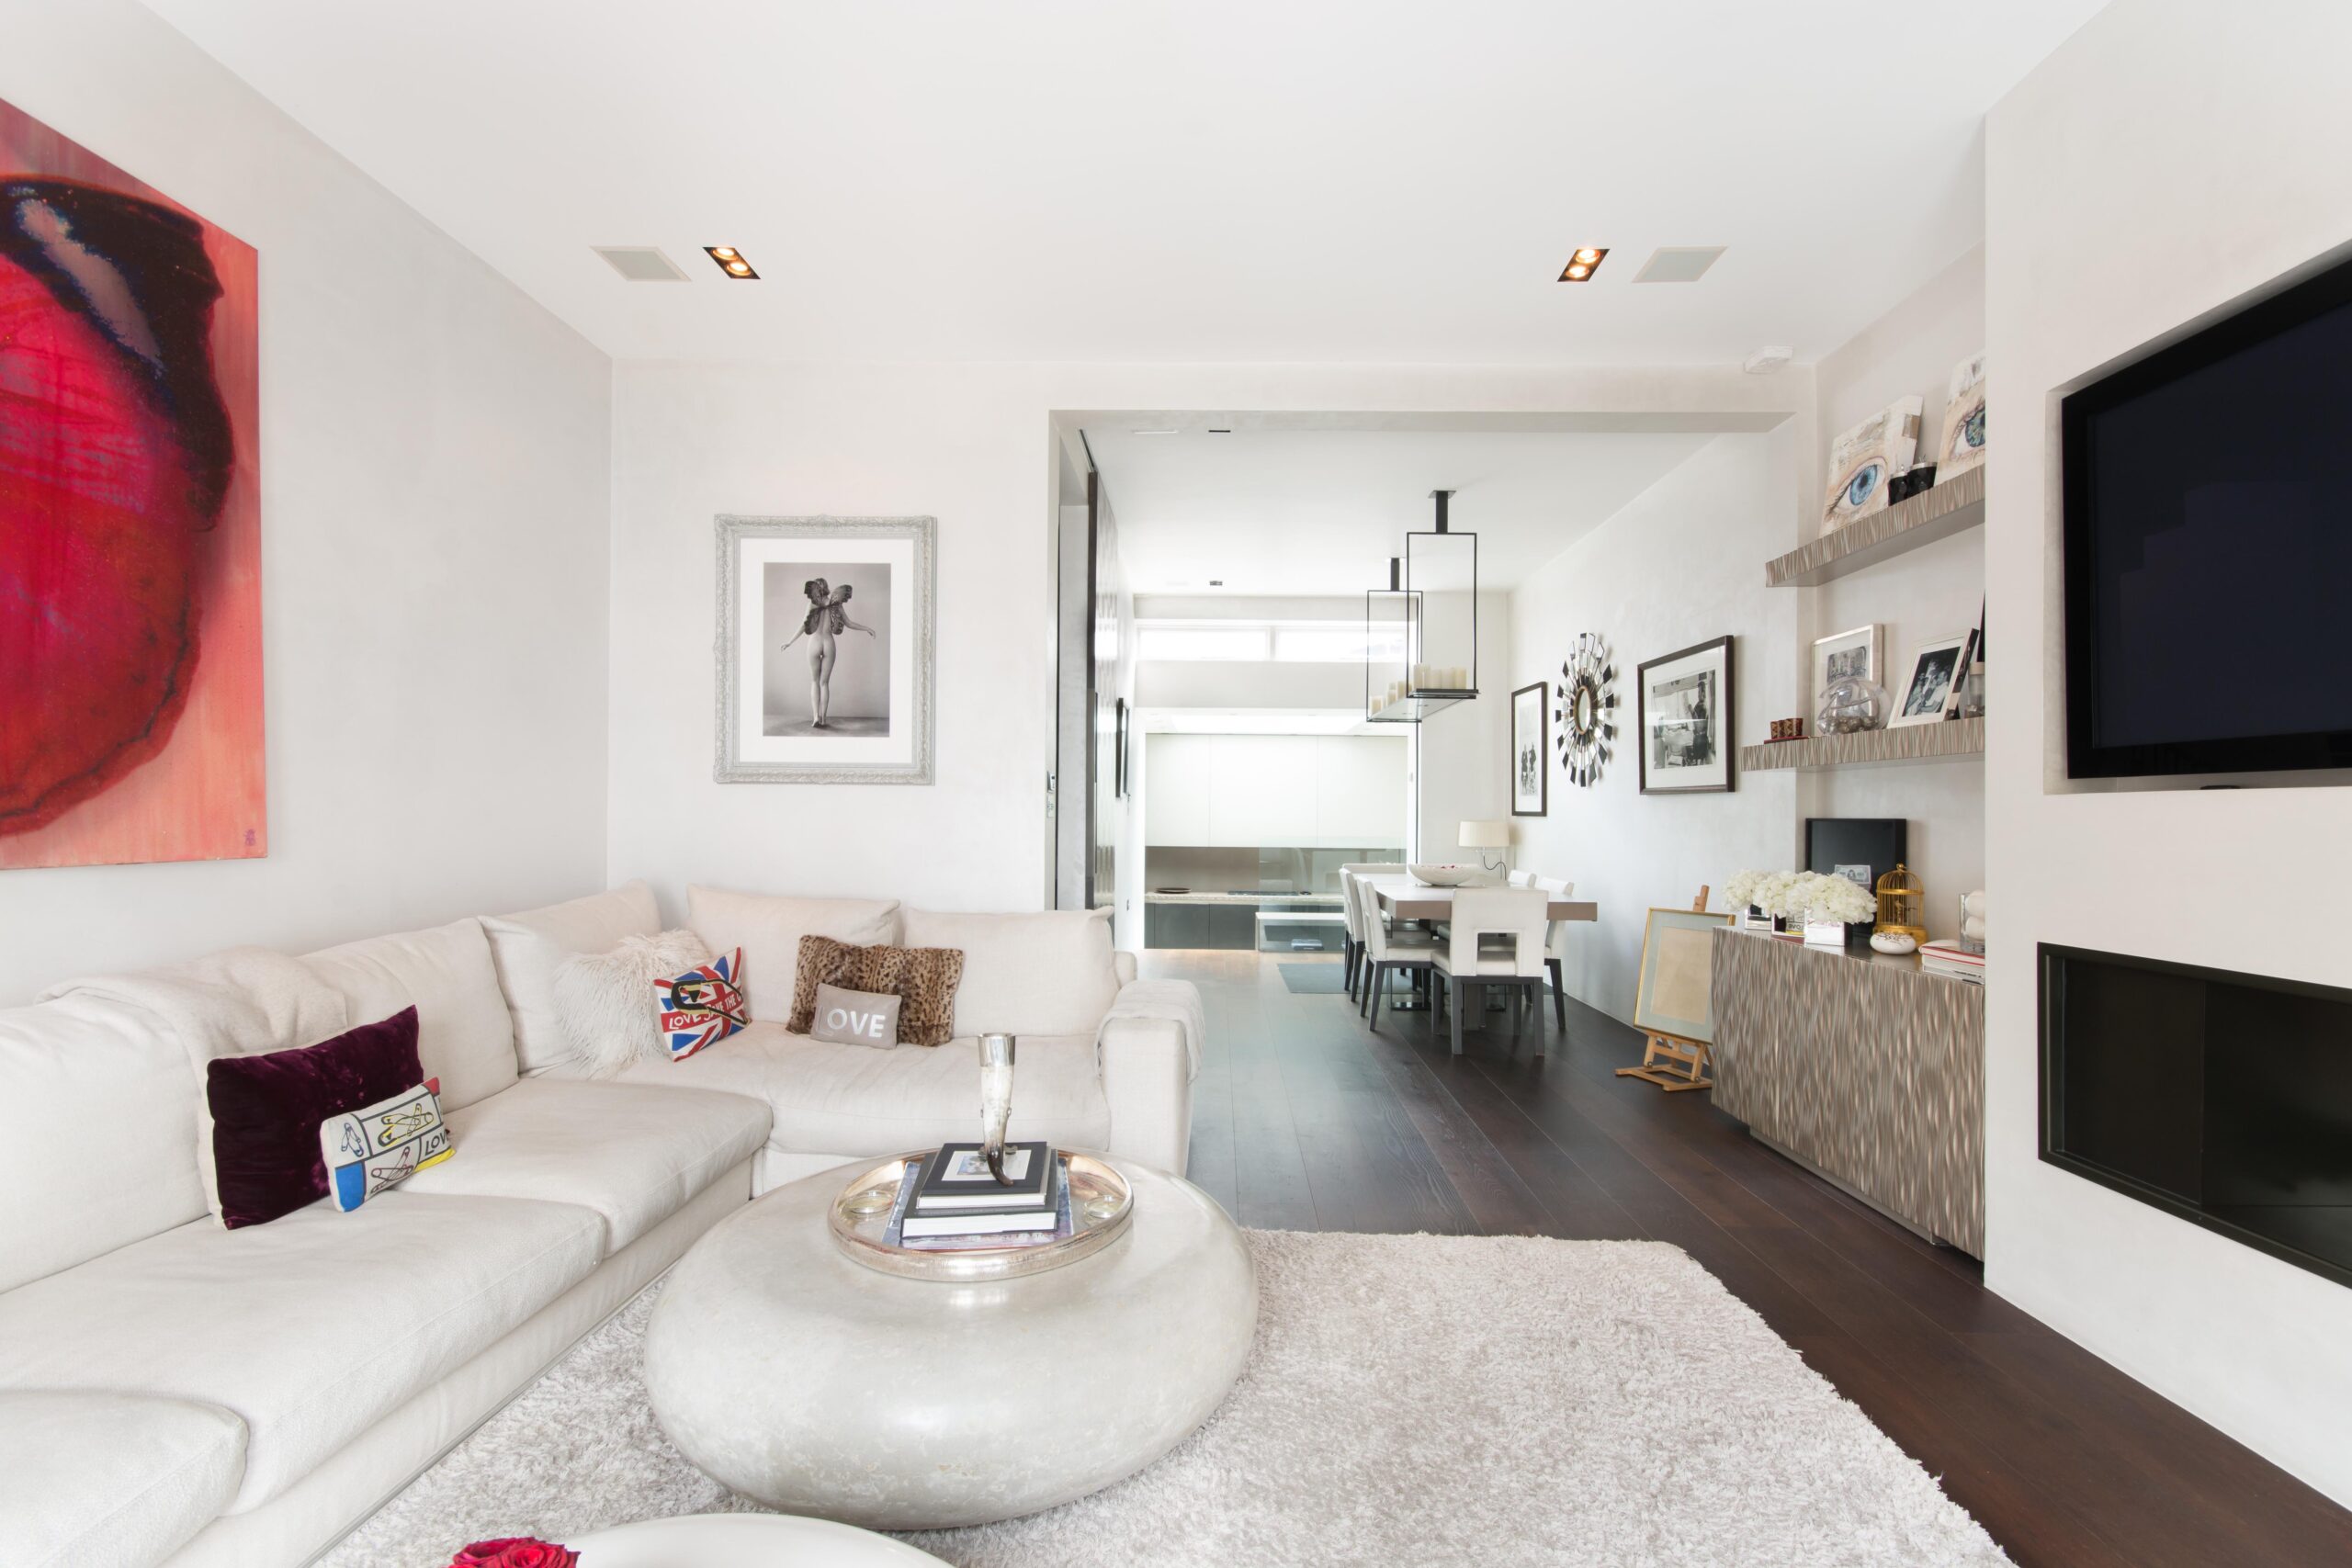 For Sale: Westbourne Grove Notting Hill W11 minimalist reception room with contemporary artwork